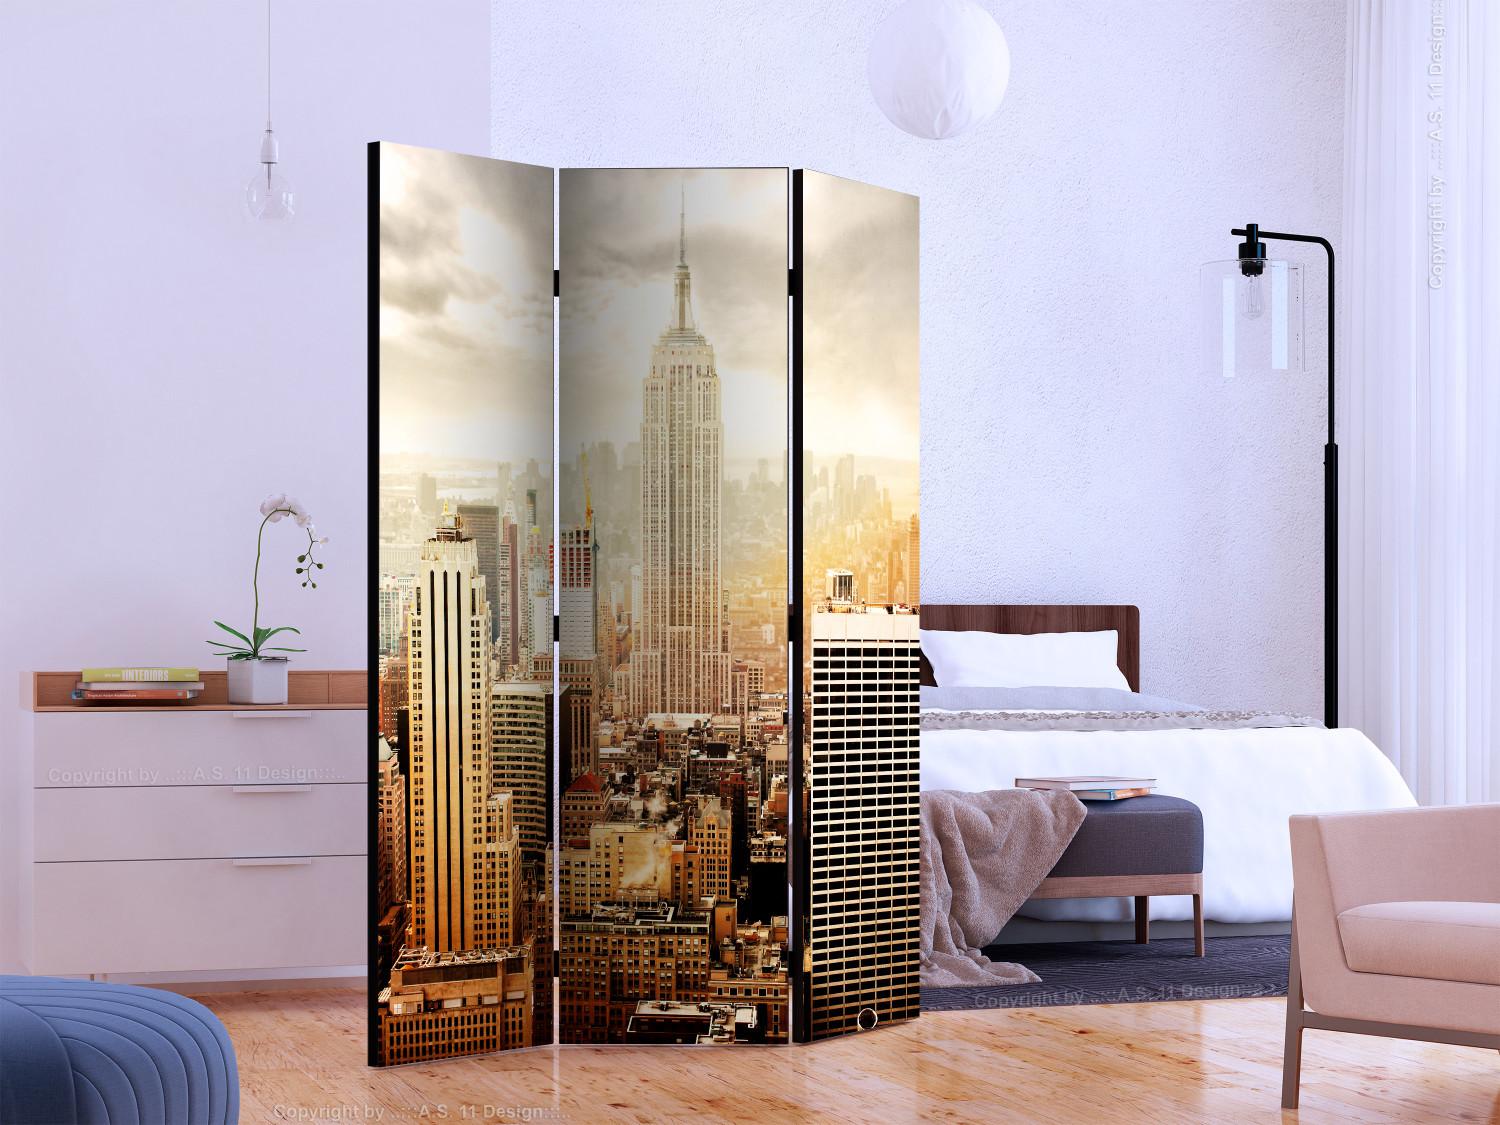 Room Divider Windswept - New York architecture with bright sunlight glare